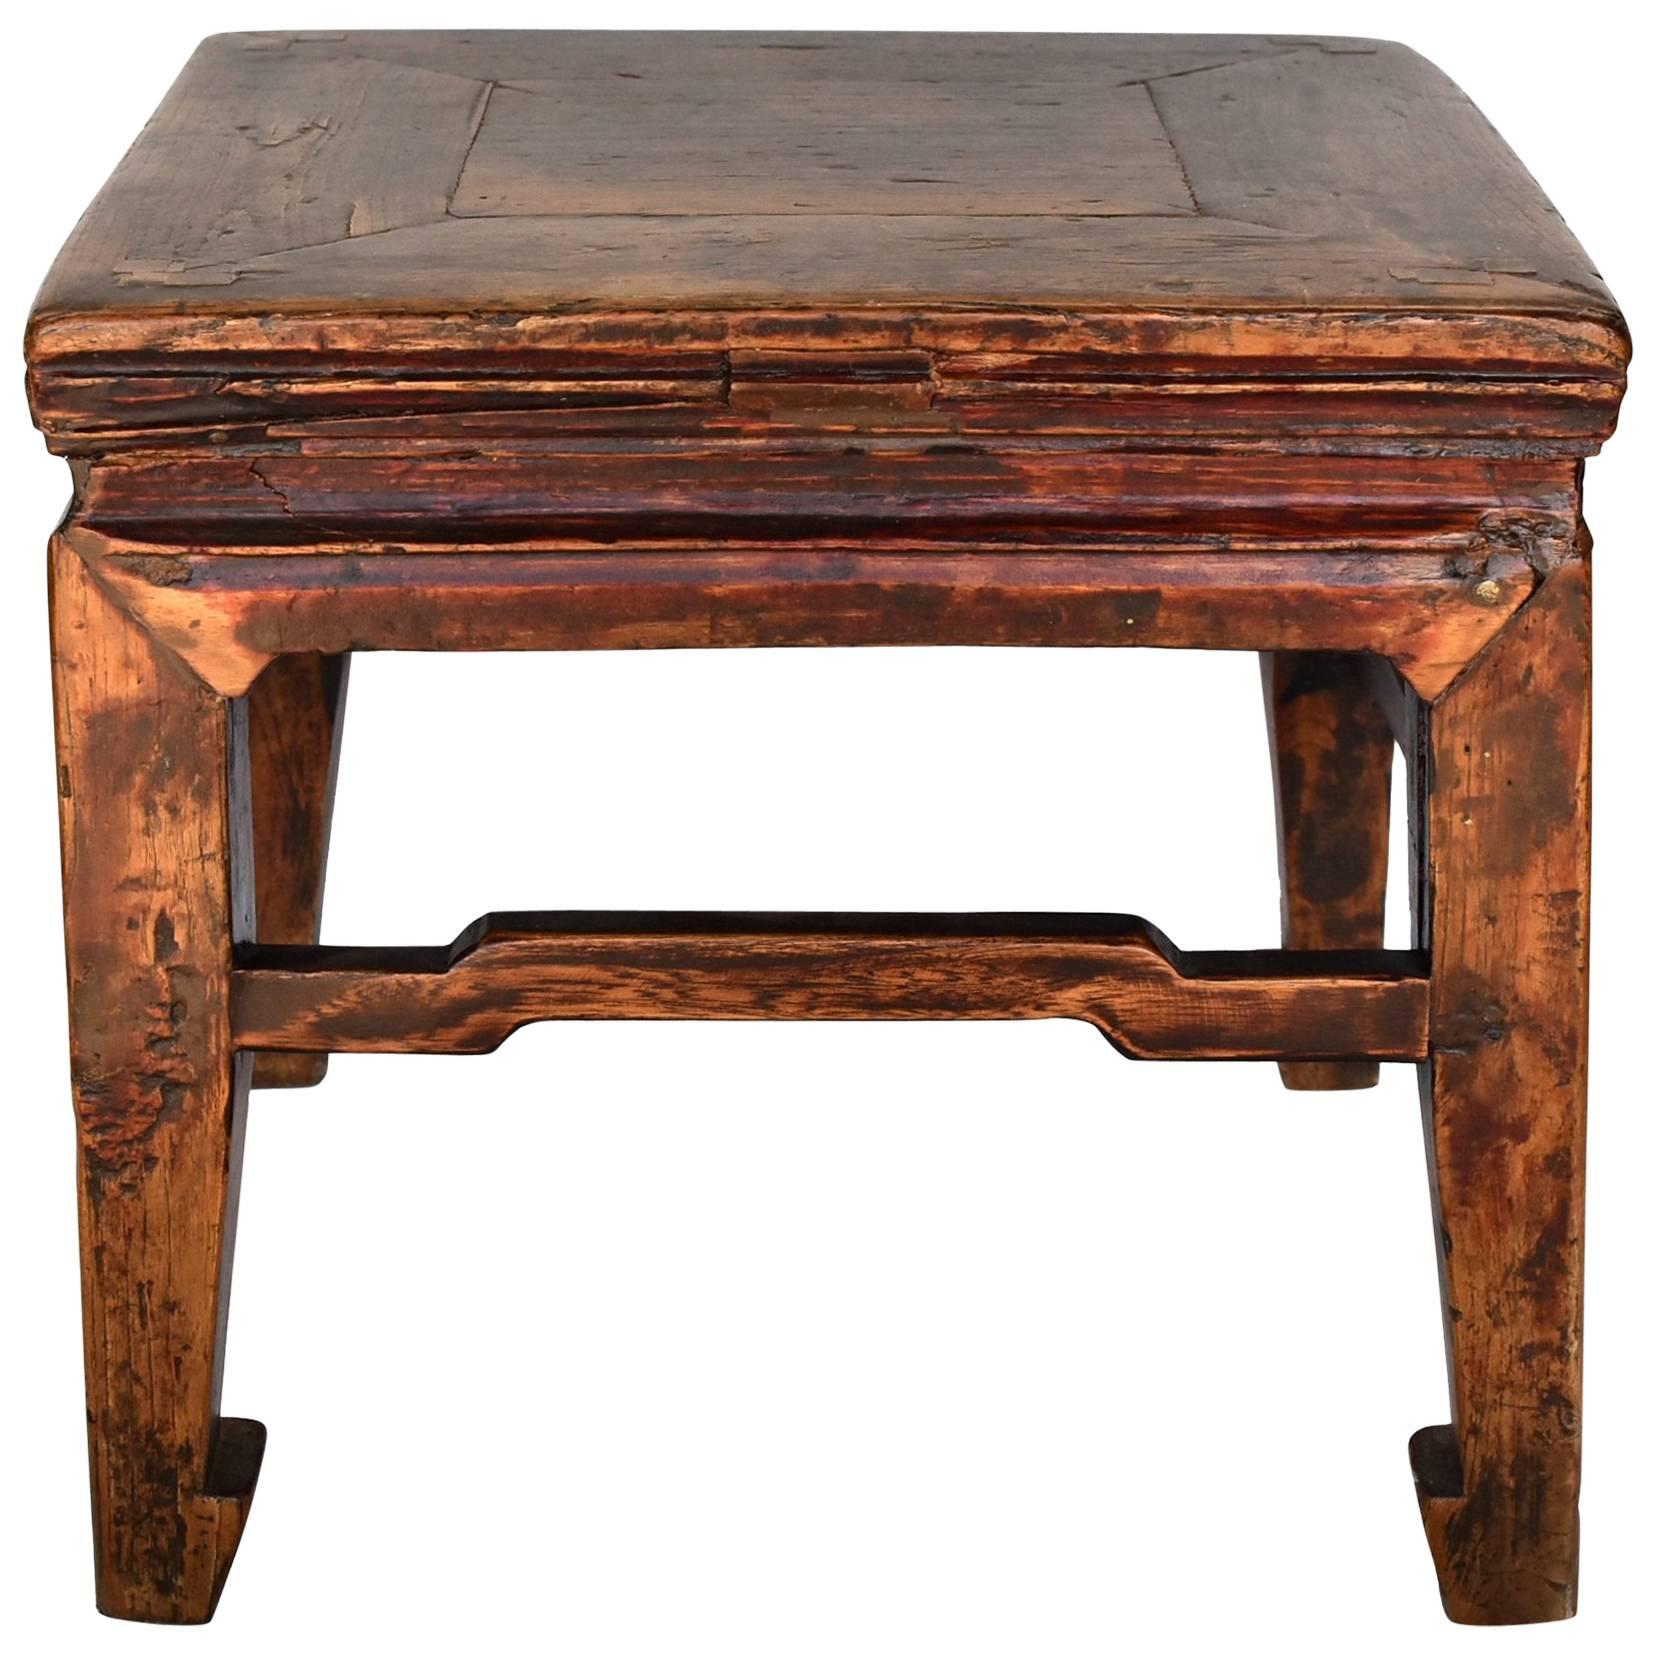 Square Antique Country Stool